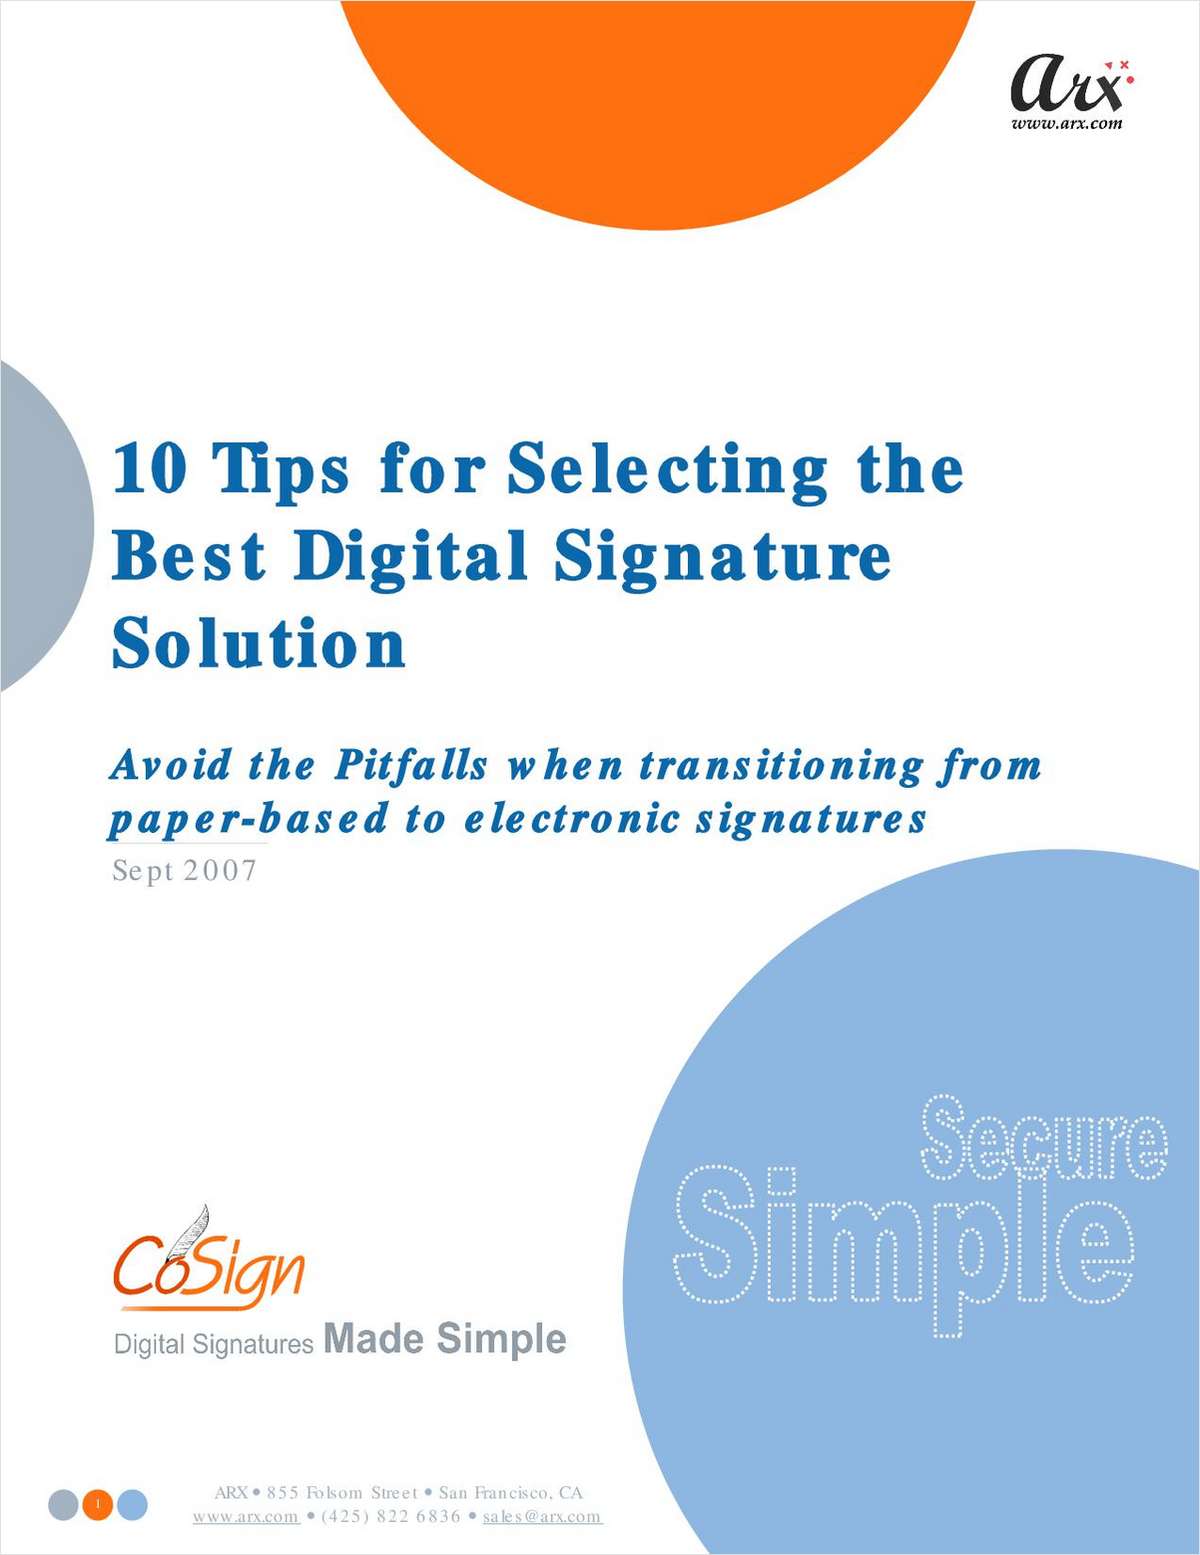 10 Tips for Selecting the Best Digital Signature Solution